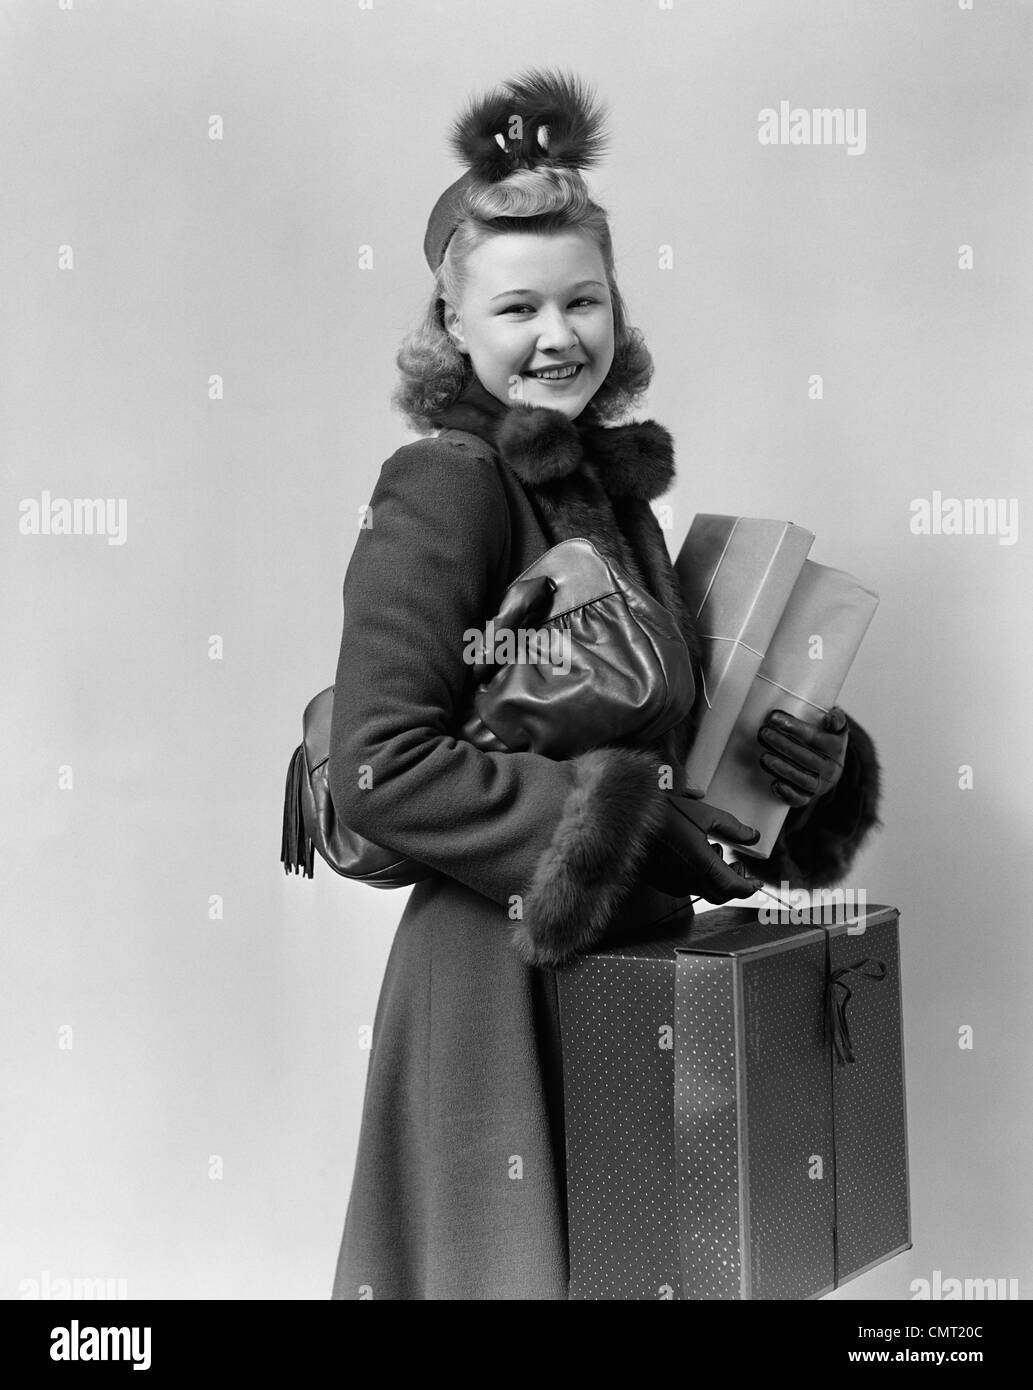 1940s 1950s SMILING YOUNG BLOND WOMAN WEARING HAT FUR TRIMMED COAT CARRYING PACKAGES LOOKING AT CAMERA Stock Photo